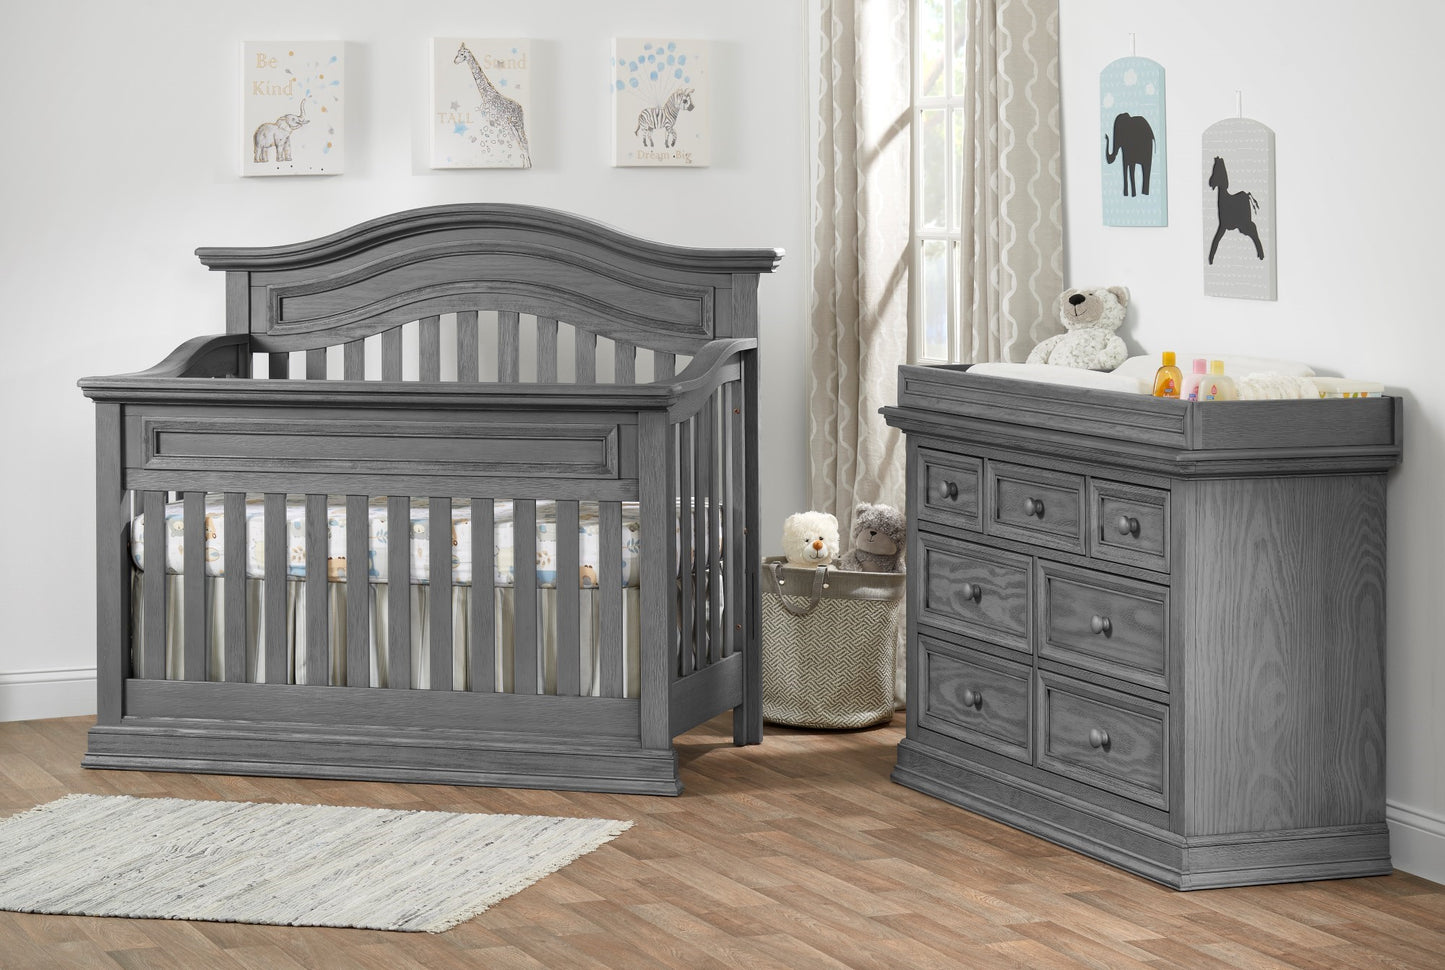 4 IN 1 GLENBROOK COLLECTION CONVERTIBLE CRIB